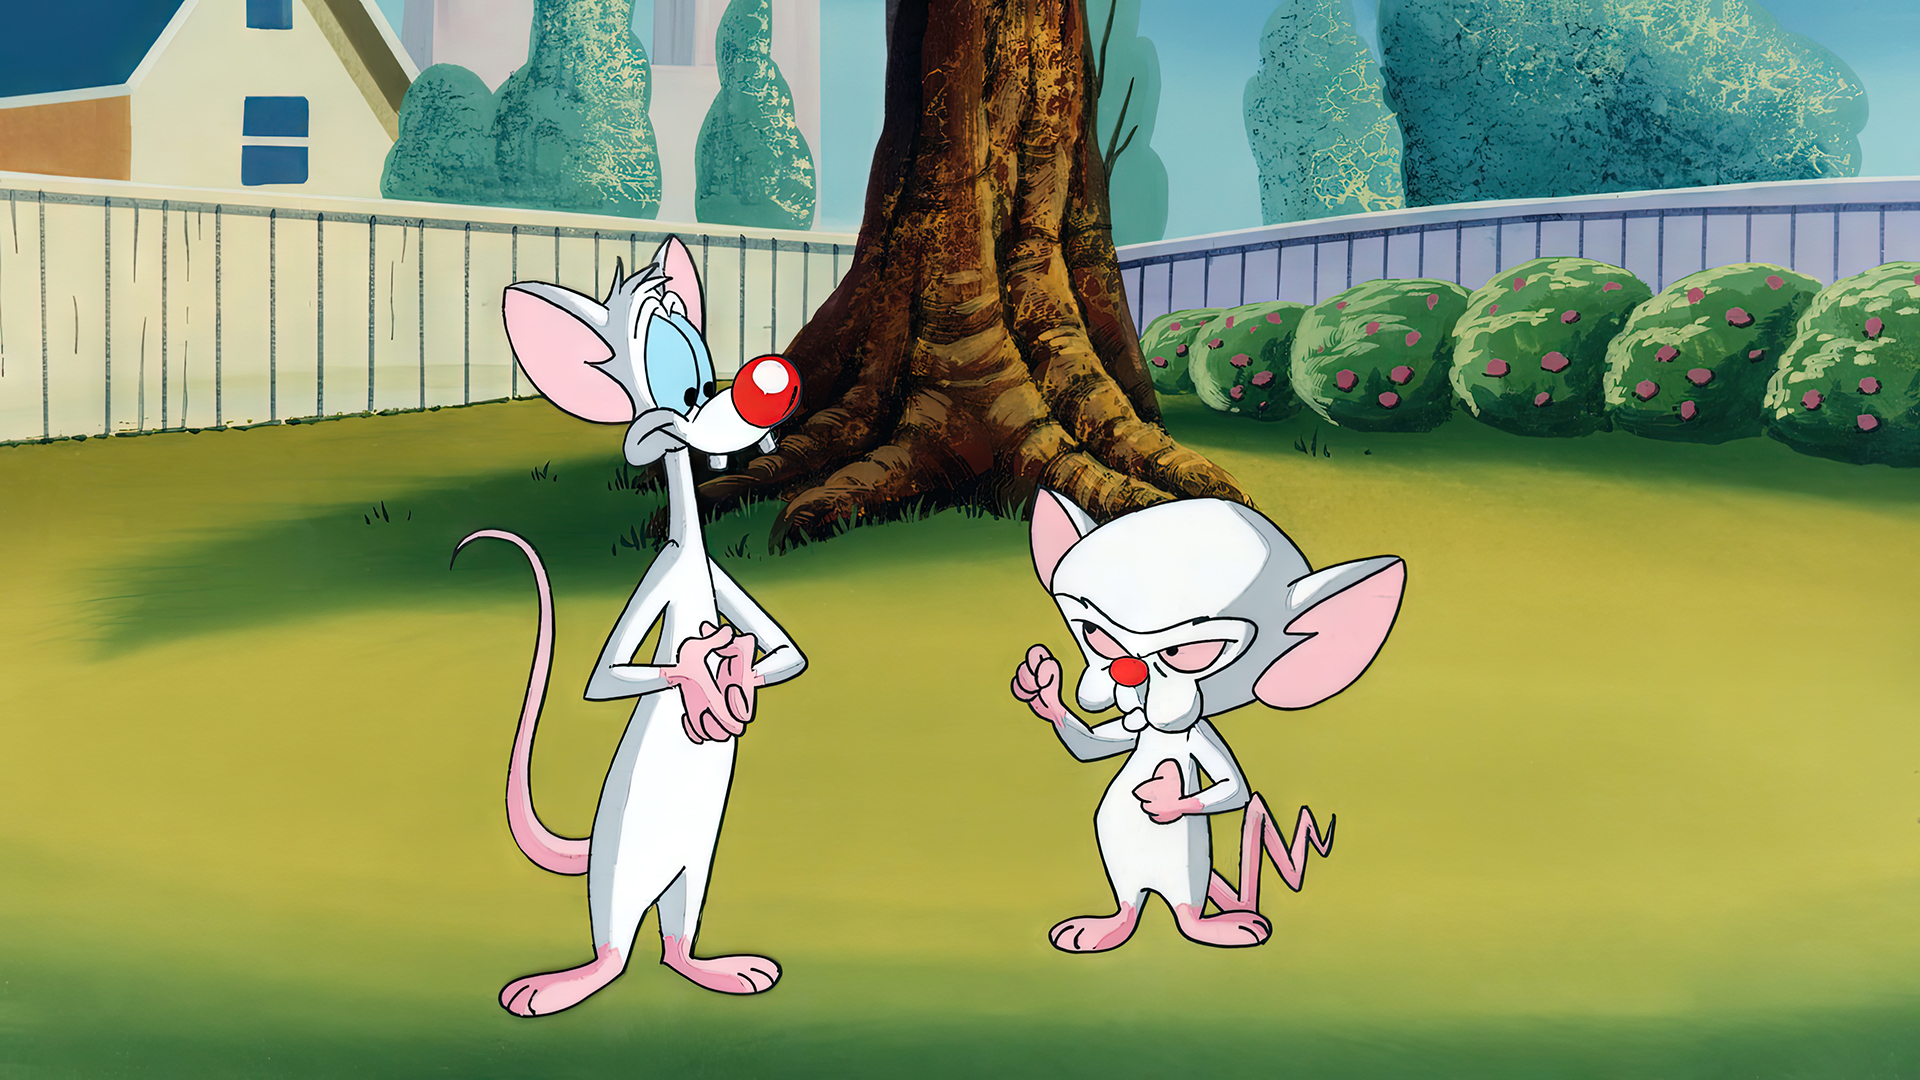 General 1920x1080 Pinky and the Brain animation animated series cartoon production cel Warner Brothers mice trees fence house bushes lawns grass